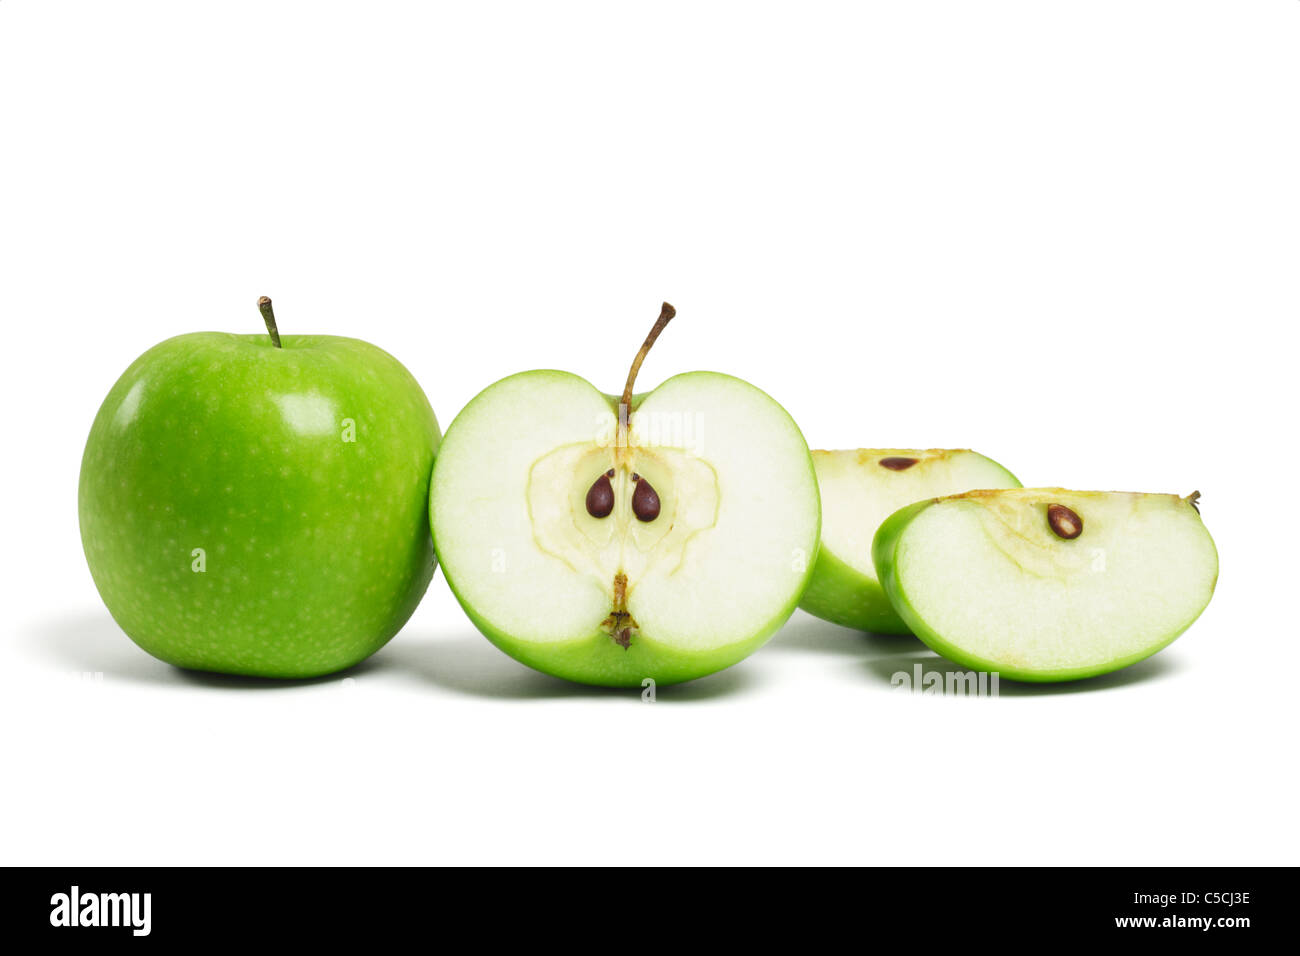 Whole fresh green apple and sliced pieces on white background Stock Photo